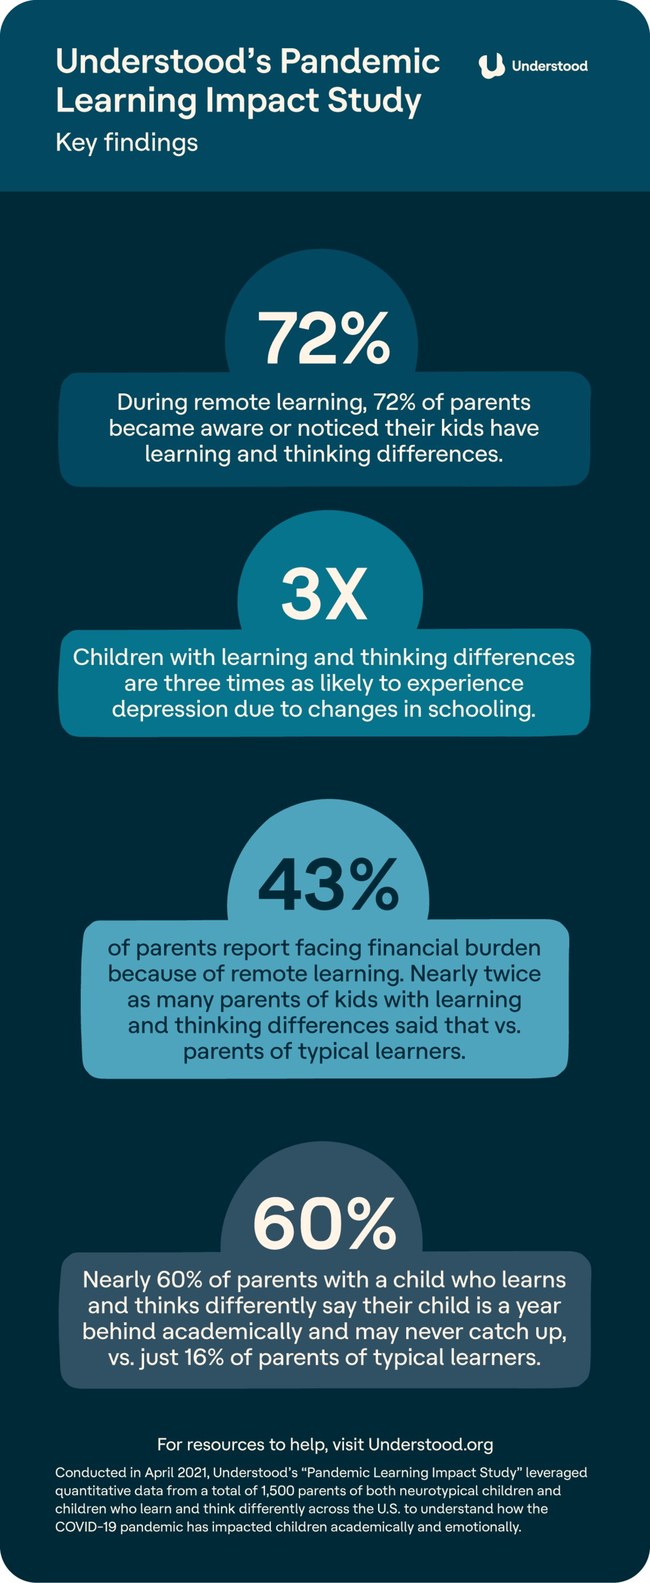 In April 2021, Understood’s “Pandemic Learning Impact Study” surveyed a total of 1,500 parents of both neurotypical children and children who learn and think differently across the U.S. to understand how the COVID-19 pandemic has impacted children academically and emotionally. The report found that children who have learning and thinking differences, like ADHD, or specific learning disabilities like dyslexia, are experiencing considerably more challenges than typical children.